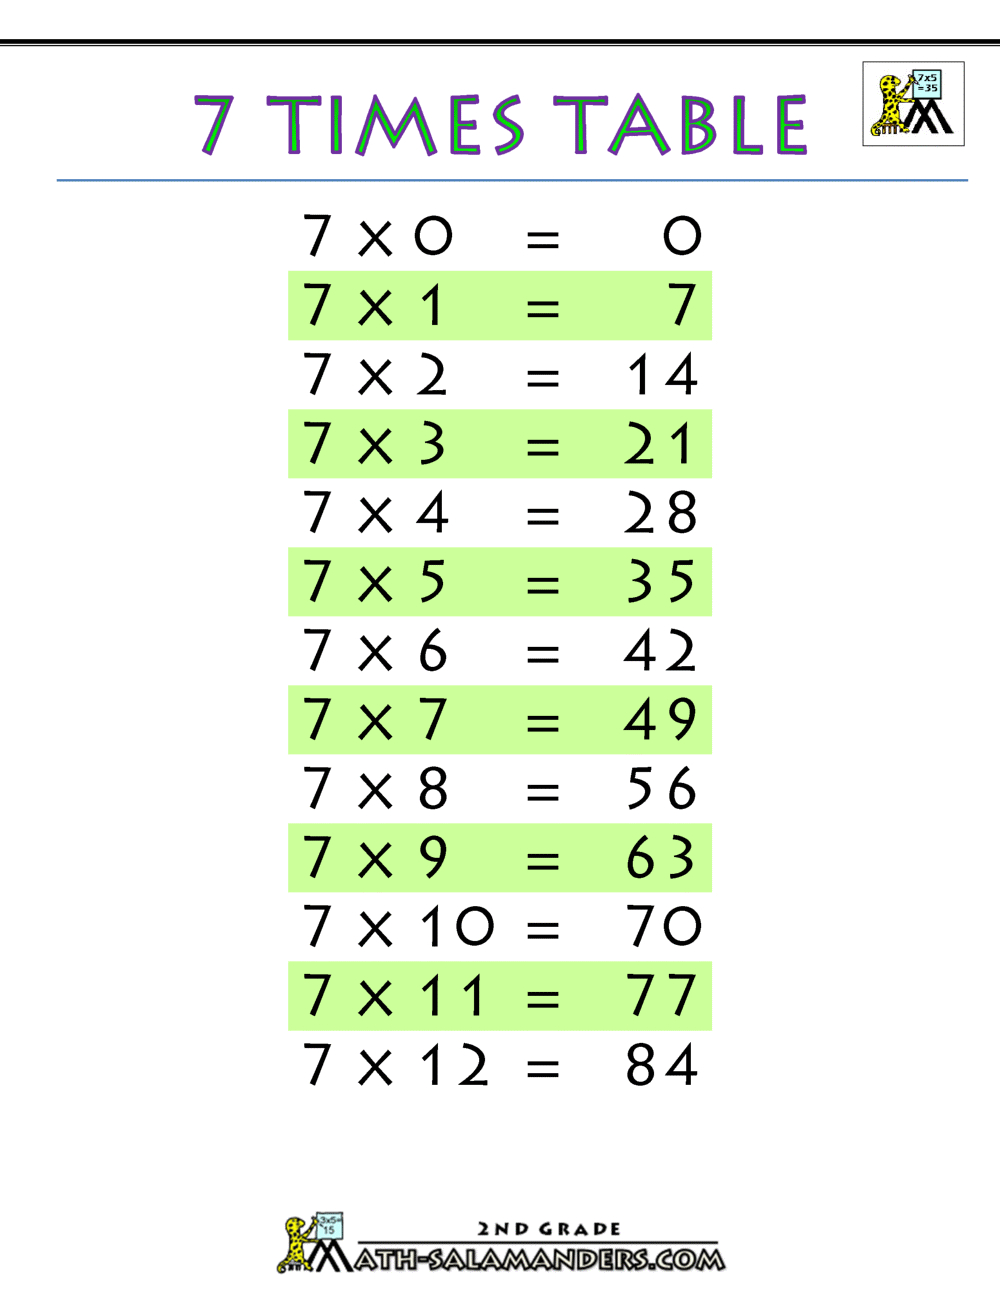 Multiplication Tables From 1 To 20 Printable Printable